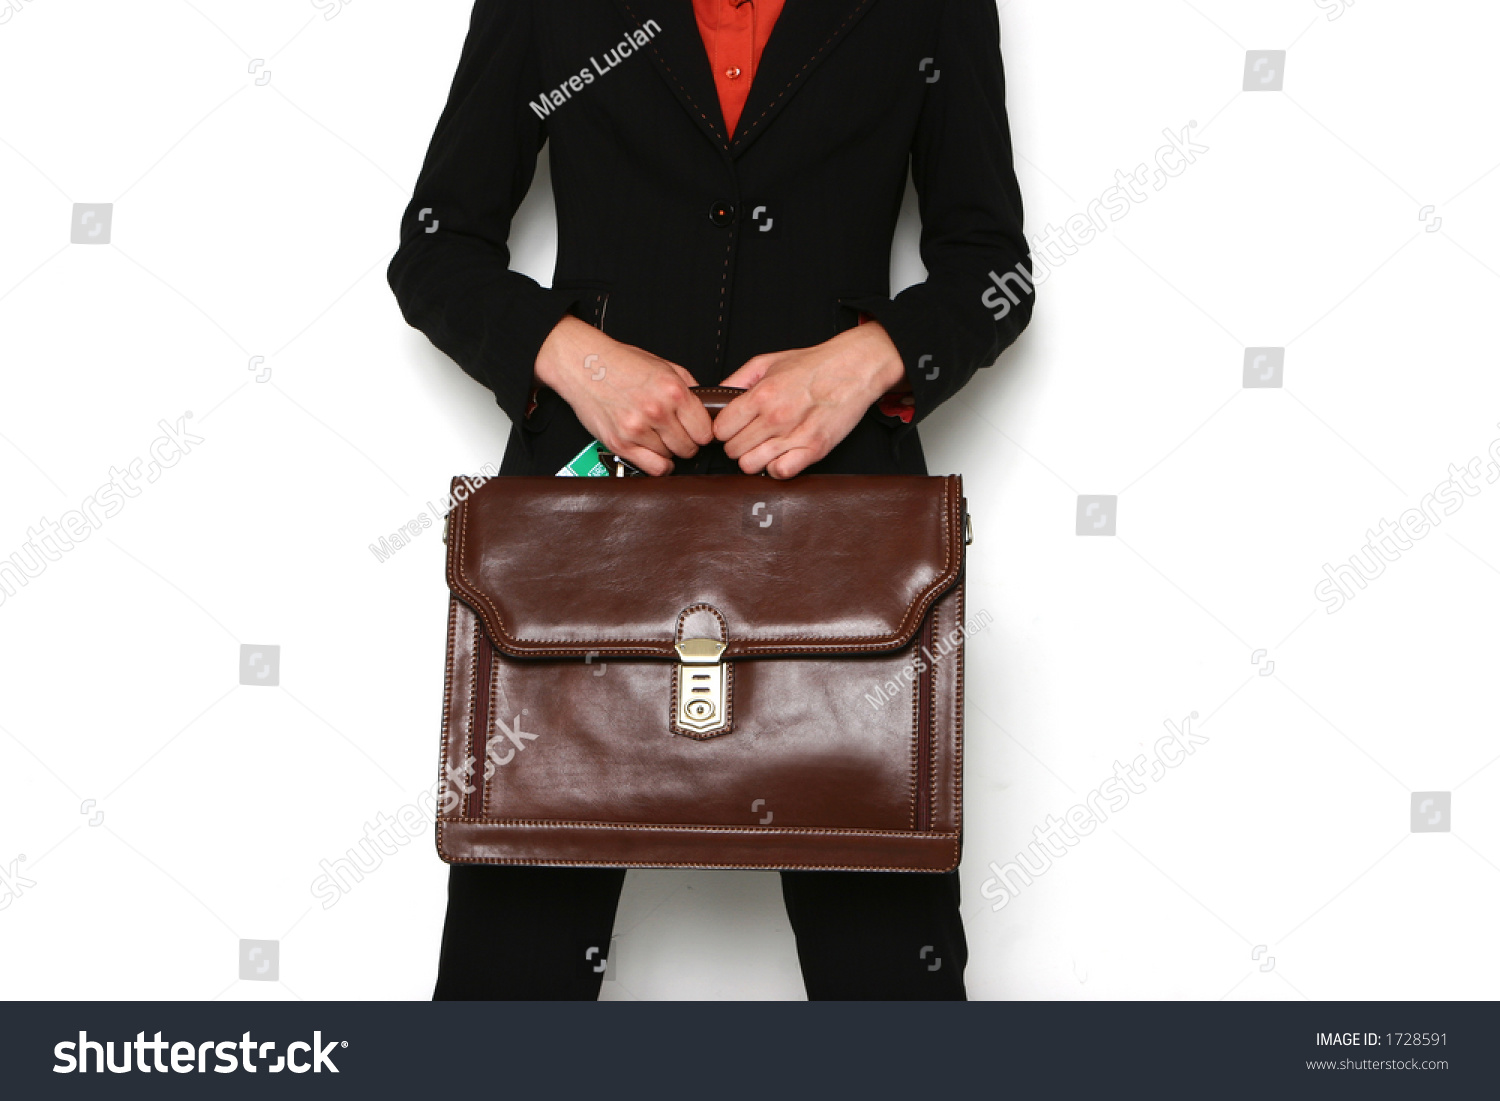 Black Suit Woman With Brown Bag Stock Photo 1728591 : Shutterstock